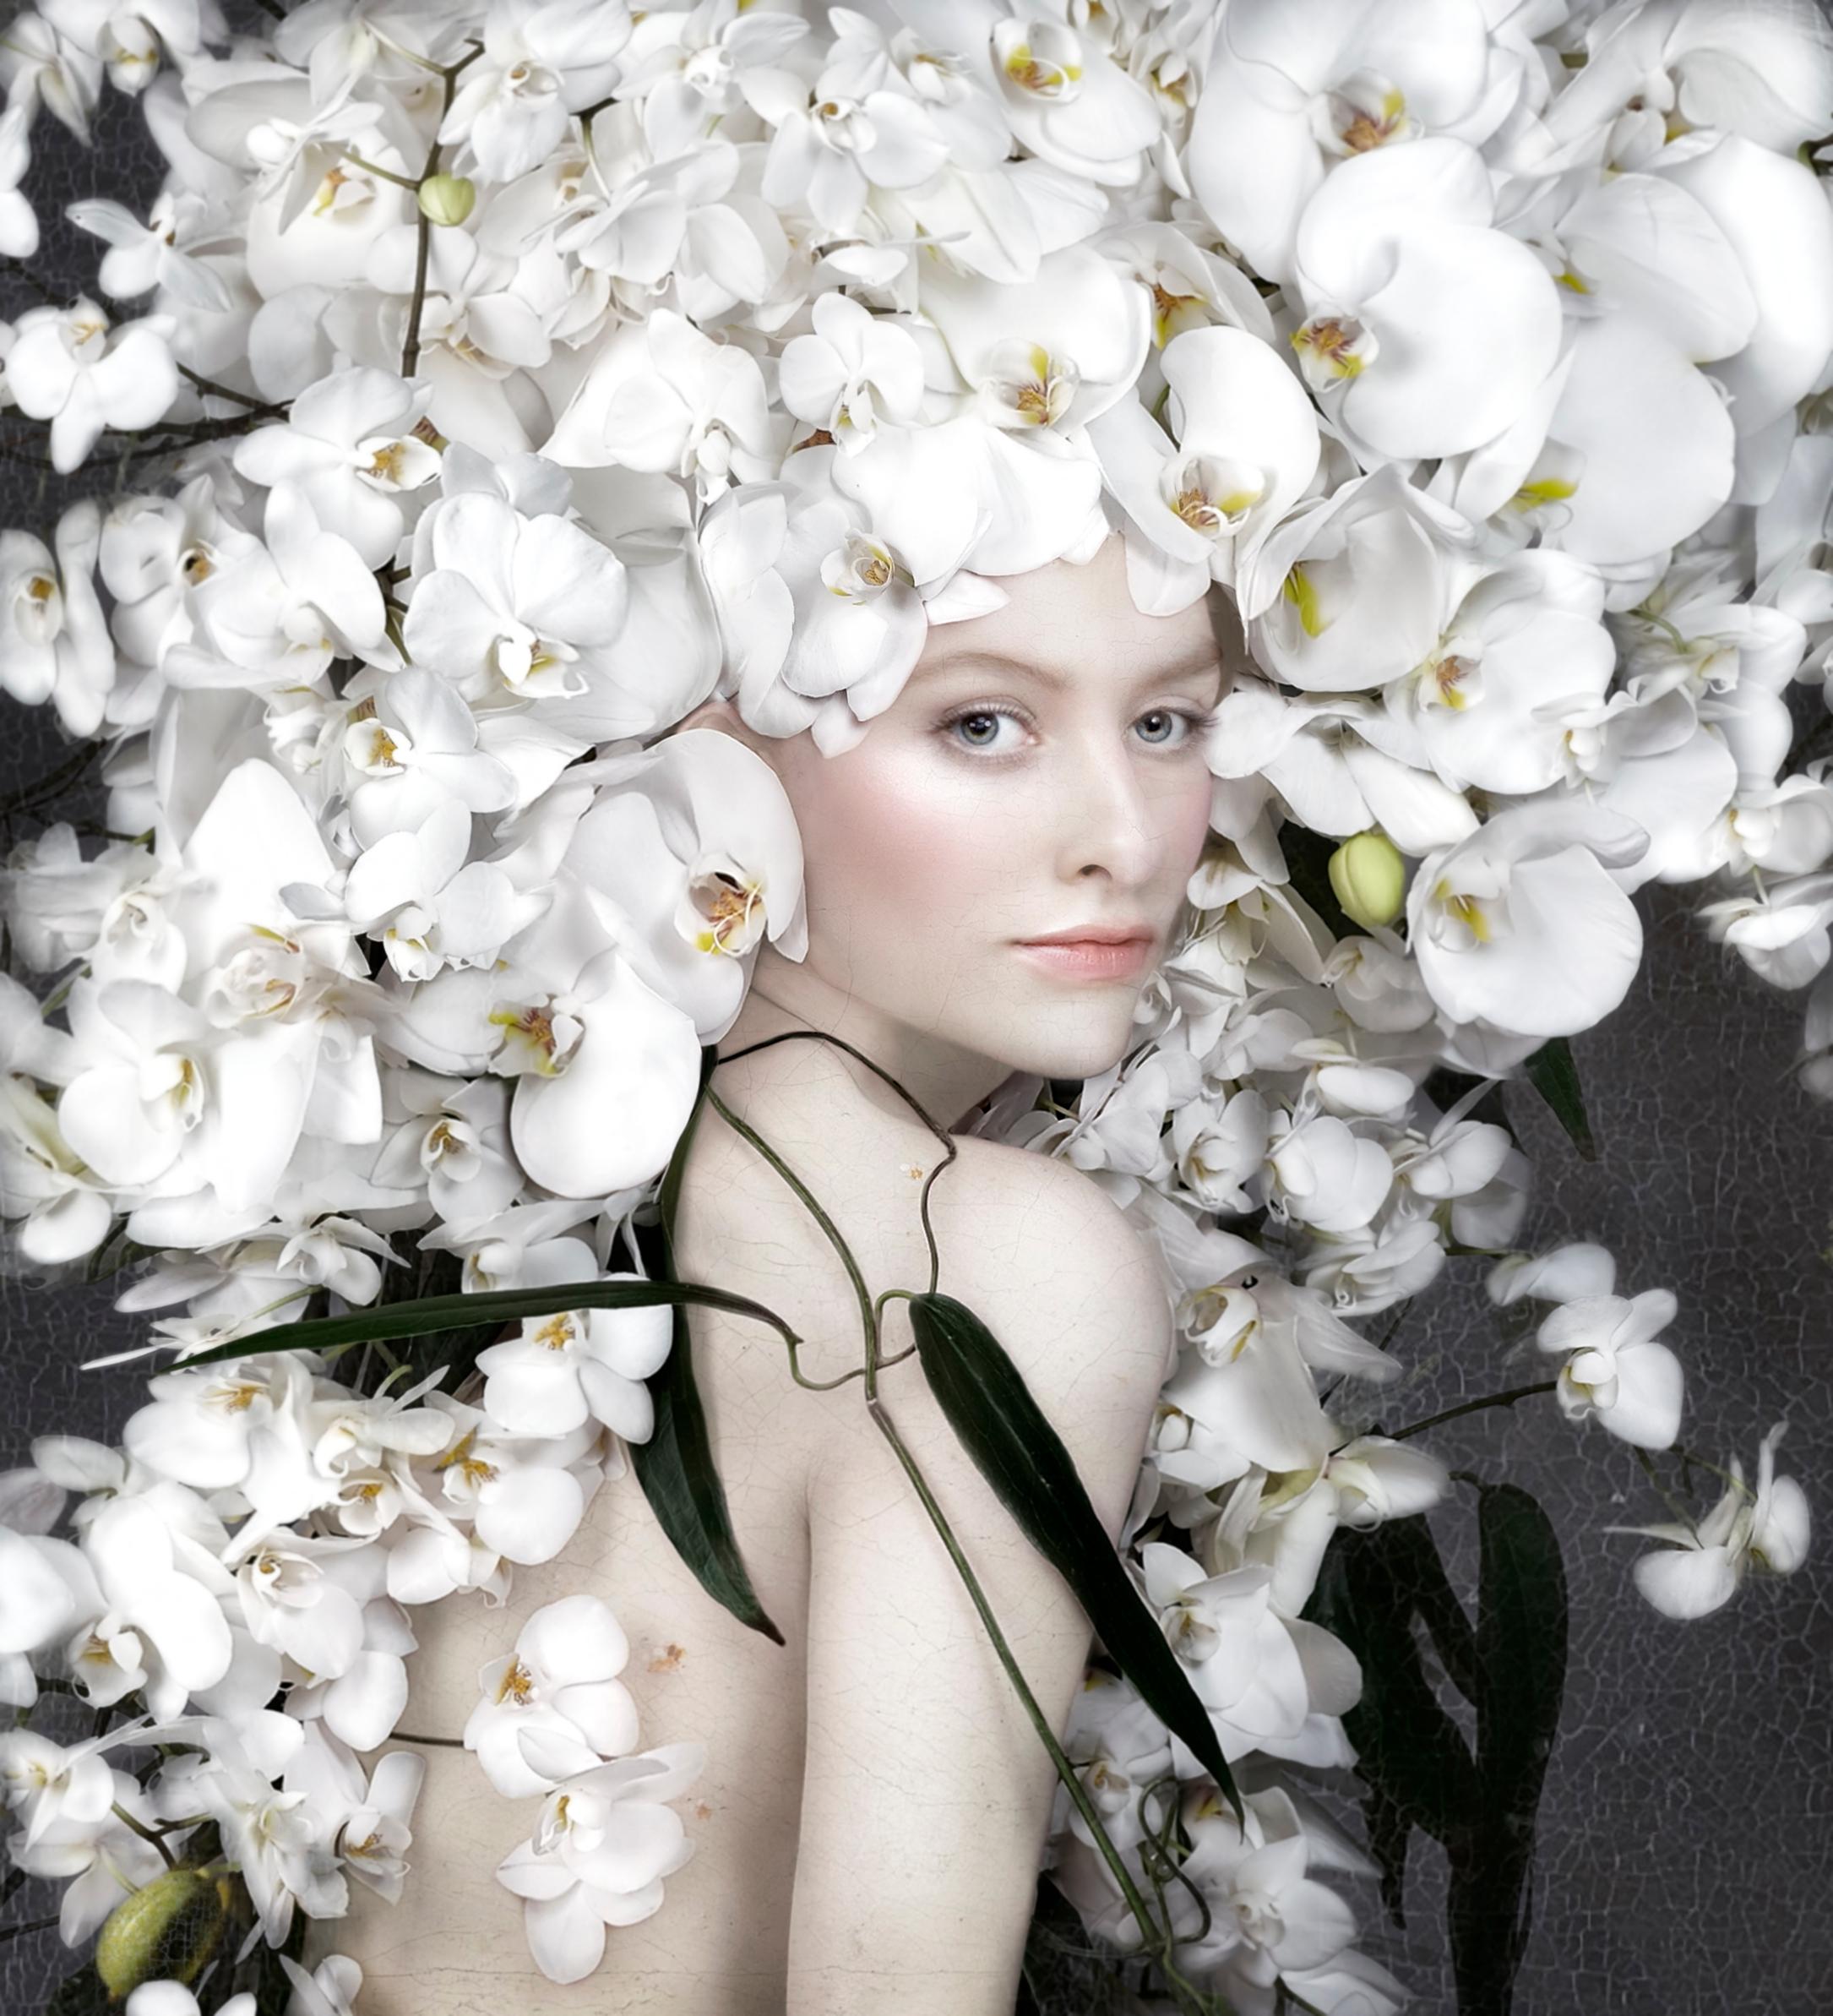 "THE REBIRTH OF THE DUTCH FLOWER COLLECTION
Isabelle van Zeijl has turned her eye on 400 million flowers destroyed during quarantine. Using flowers salvaged from her local growers, Van Zeijl has created a series of photographs that represent